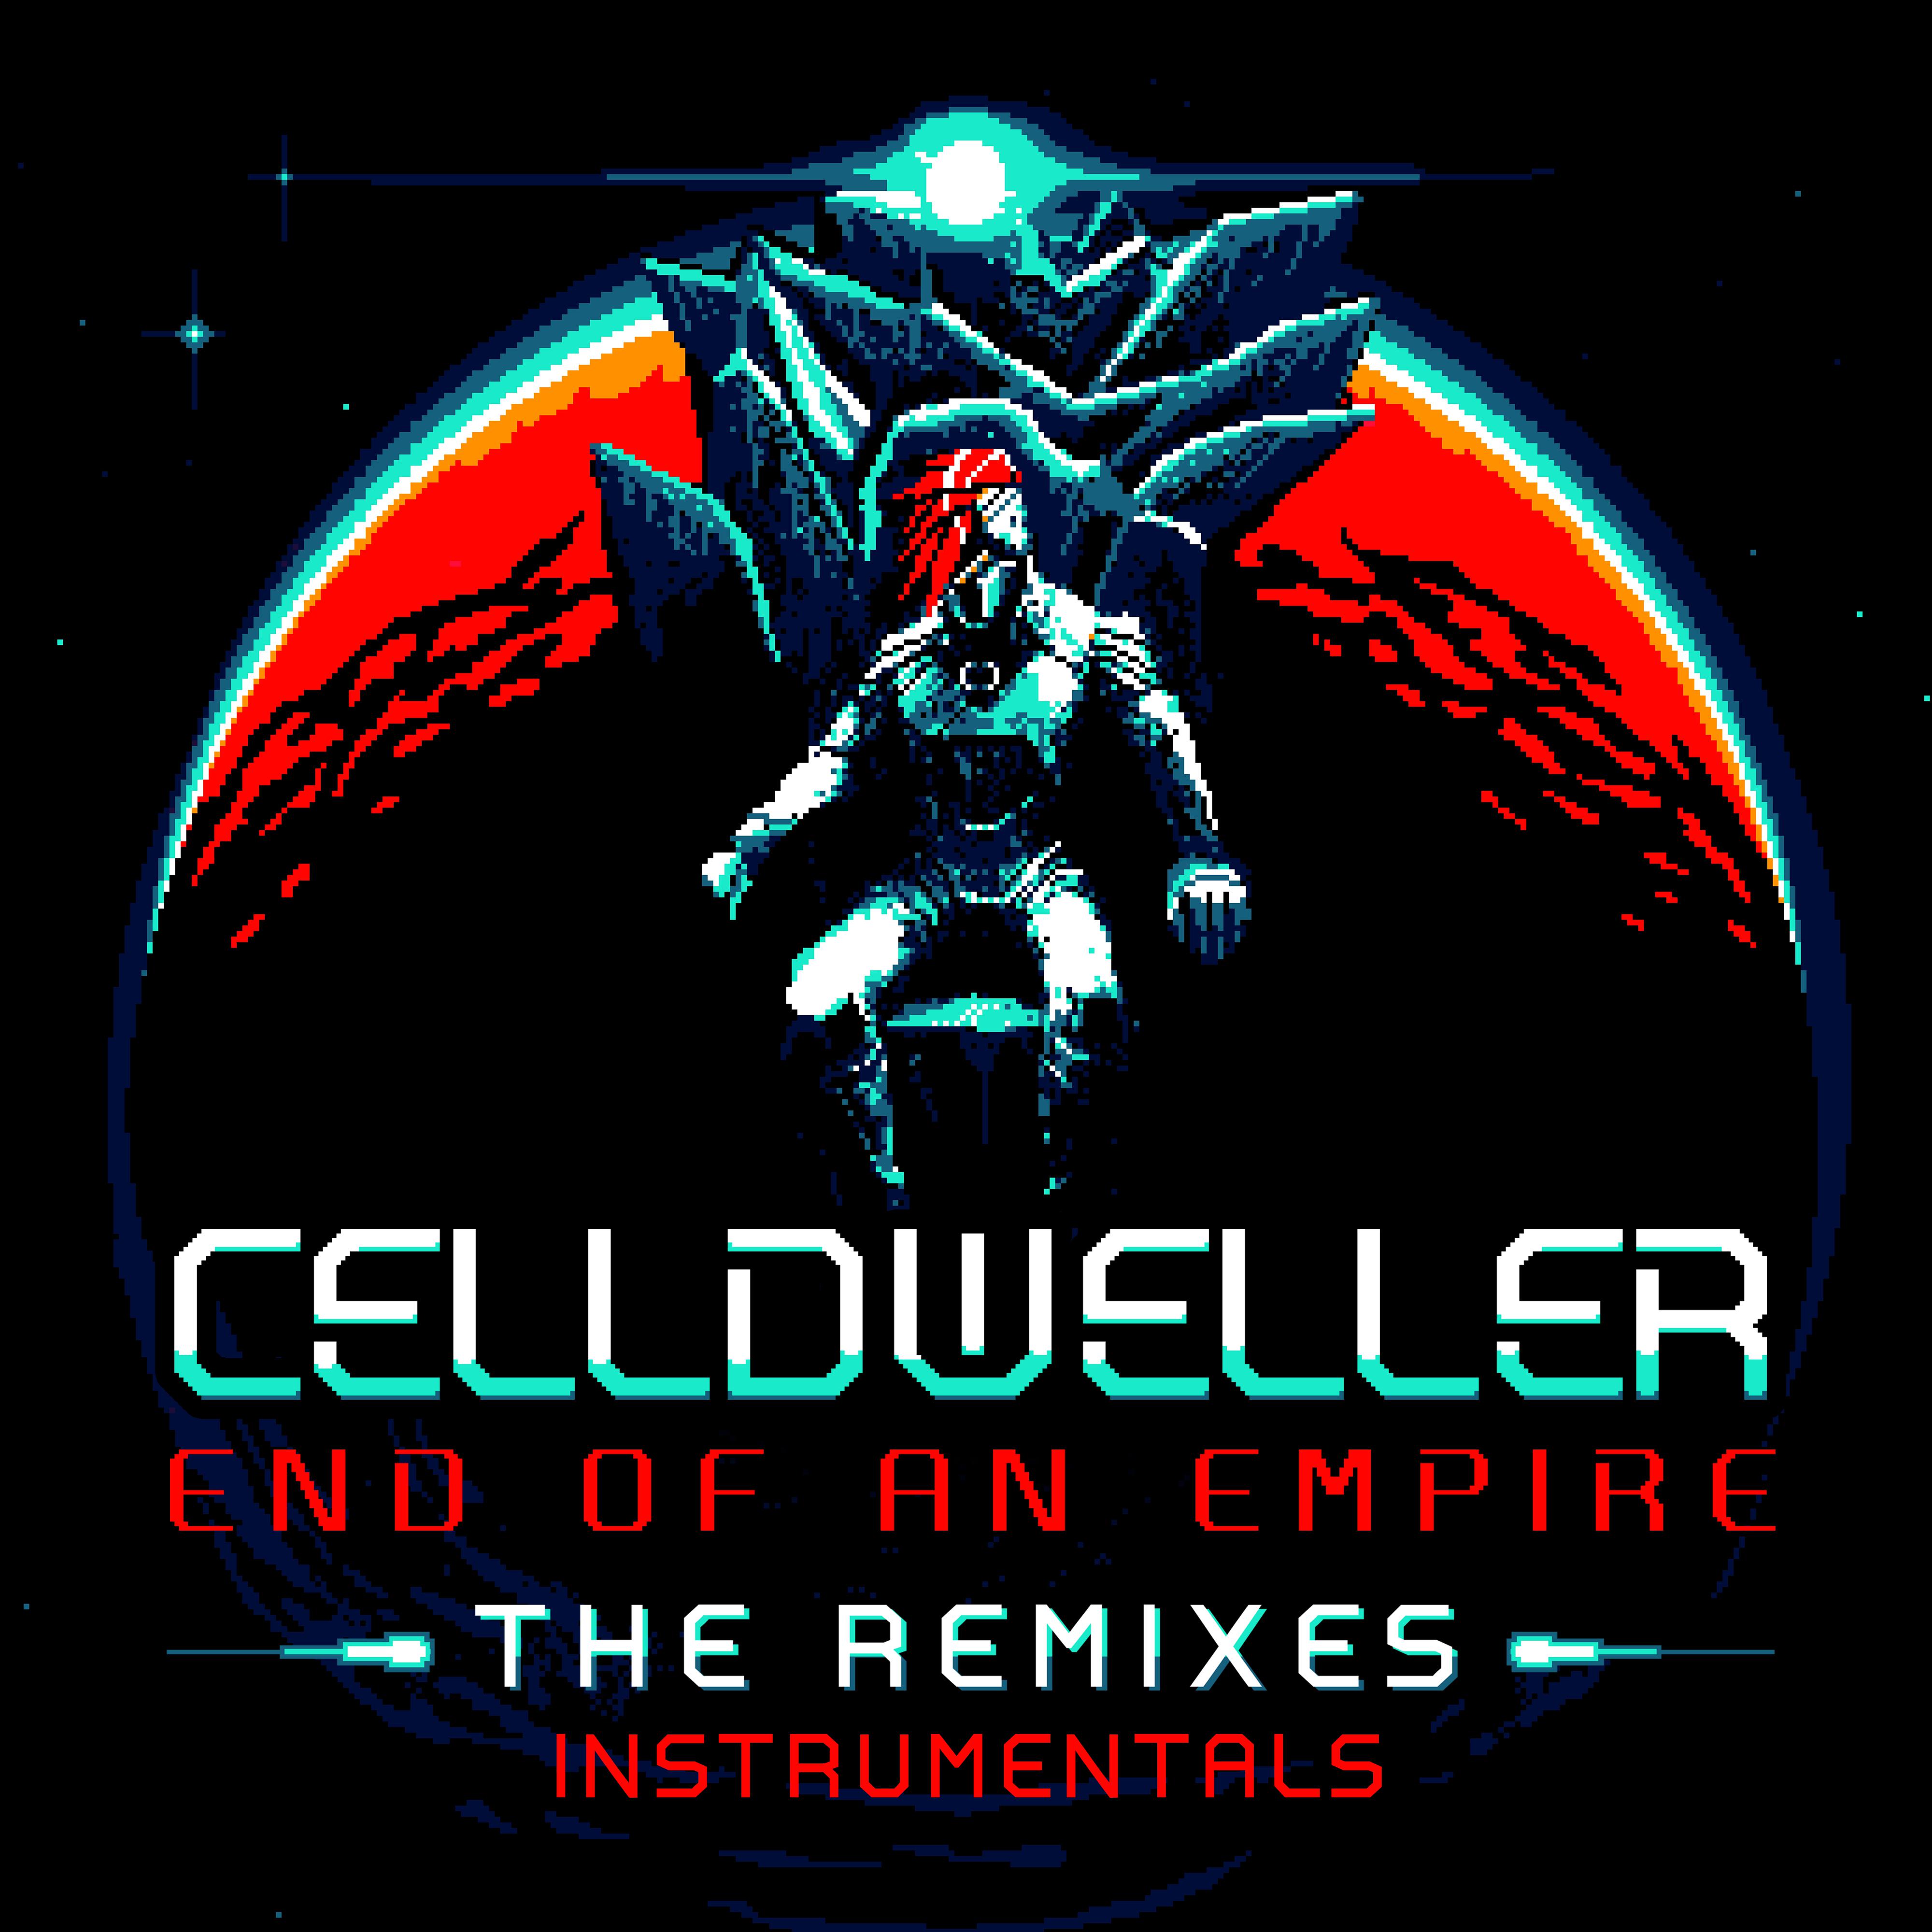 Down to Earth (Celldweller Remix) (Instrumental)